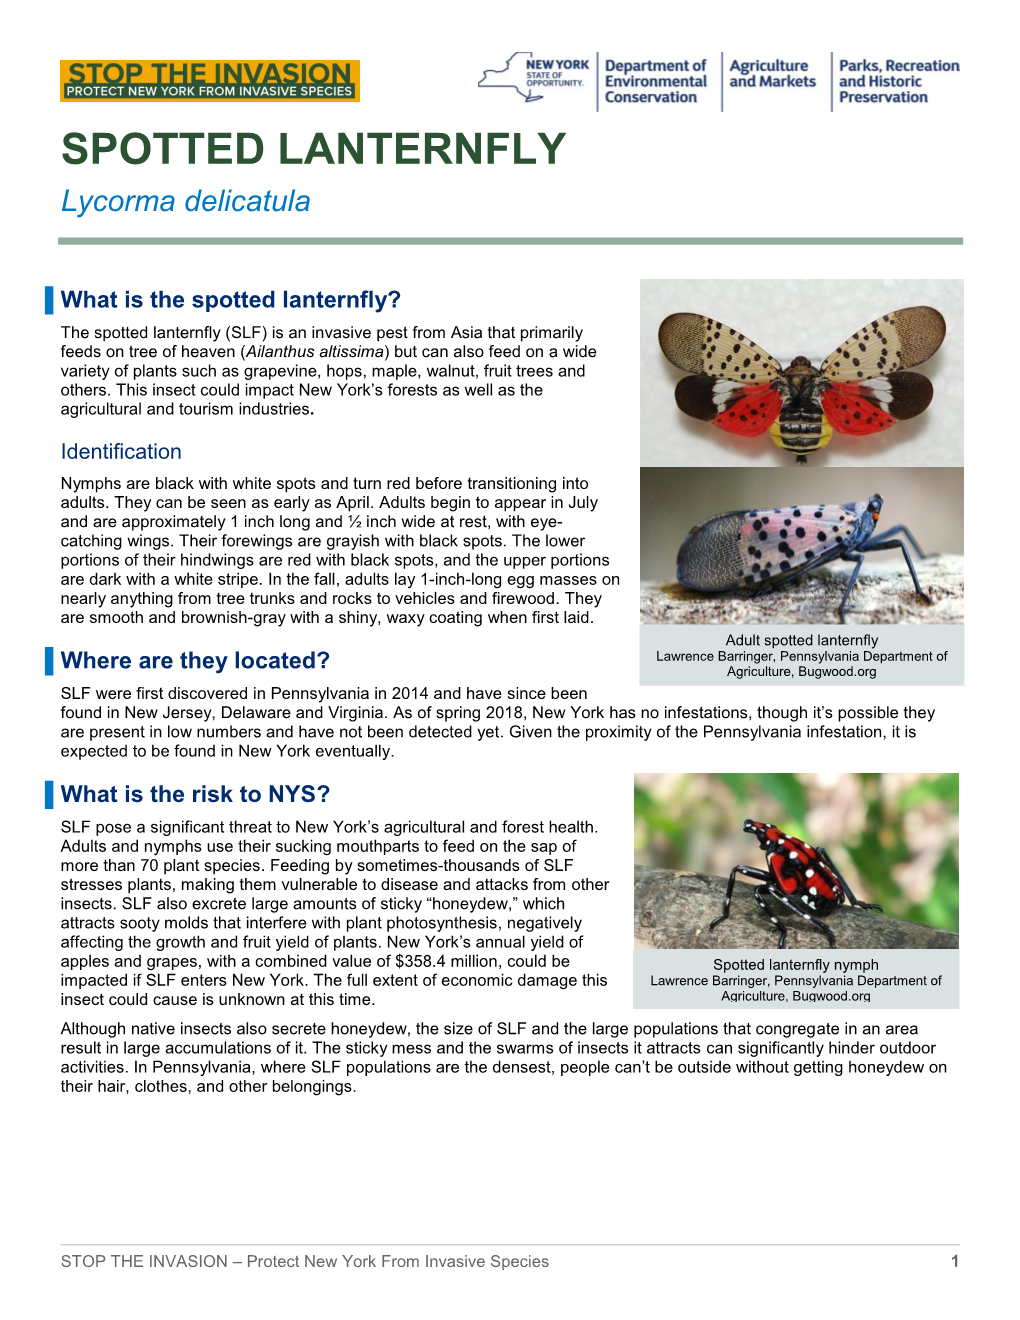 Spotted Lanternfly Fact Sheet